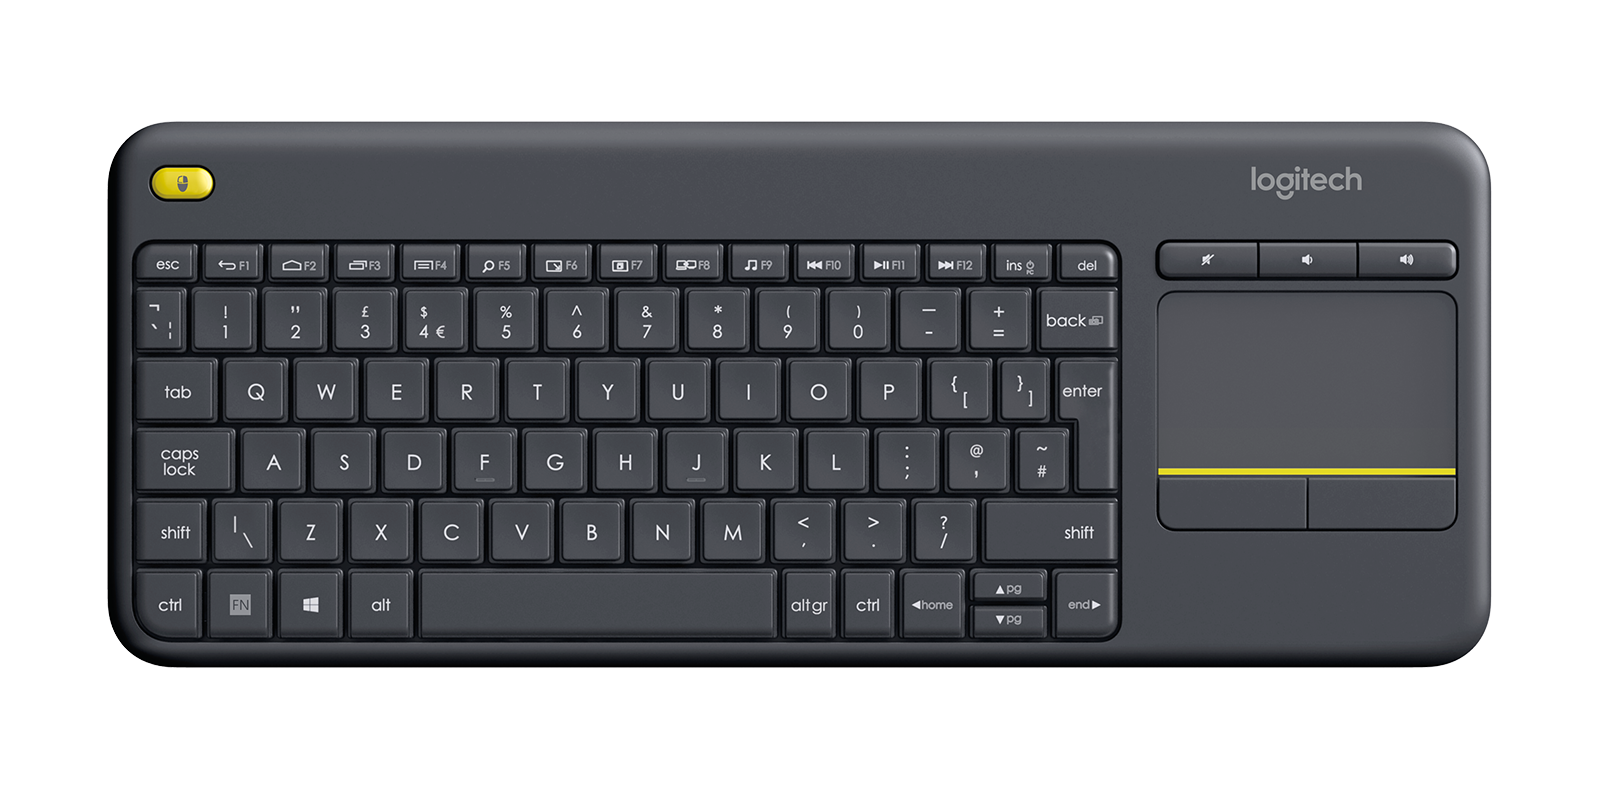 Smil Lure Lille bitte Logitech K400 Plus Touchpad Keyboard for TV connected PC